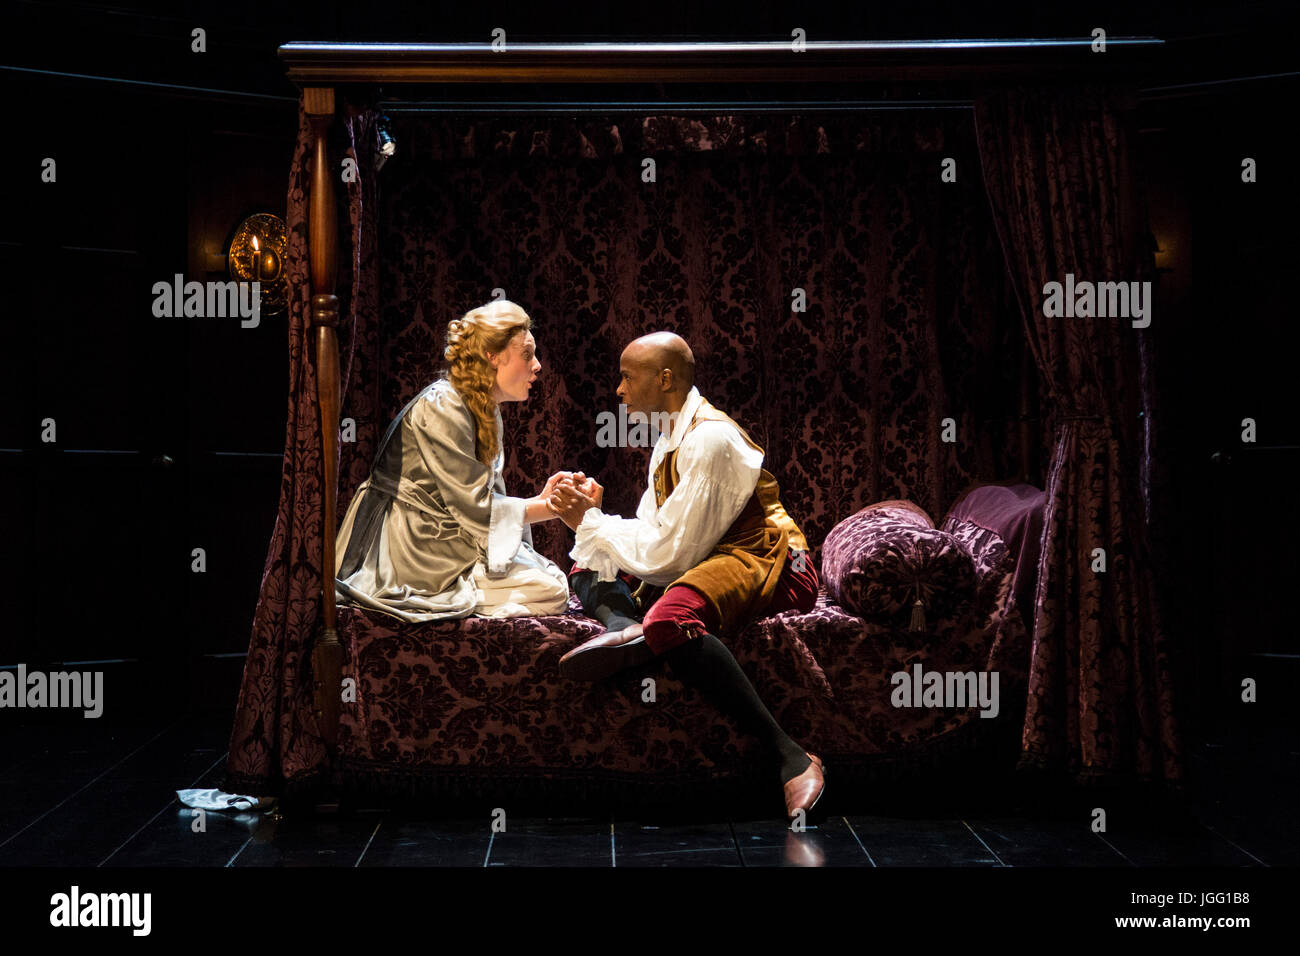 London, UK. 6th July, 2017. Romola Garai (Sarah Churchill) and Chu Omambala (John Churchill). After a sold out run at the Swan Theatre in Stratford-upon-Avon in 2015-16, the Royal Shakespeare Company production of Queen Anne transfers to the Theatre Royal Haymarket from 30 June for a thirteen week limited run until 30 September 2017. Queen Anne is a new play written by Helen Edmundson and directed by Natalie Abrahami. With Emma Cunniffe as Queen Anne/Princess Anne, Romola Garai as Sarah Churchill/Duchess of Marlborough. Credit: Bettina Strenske/Alamy Live News Stock Photo